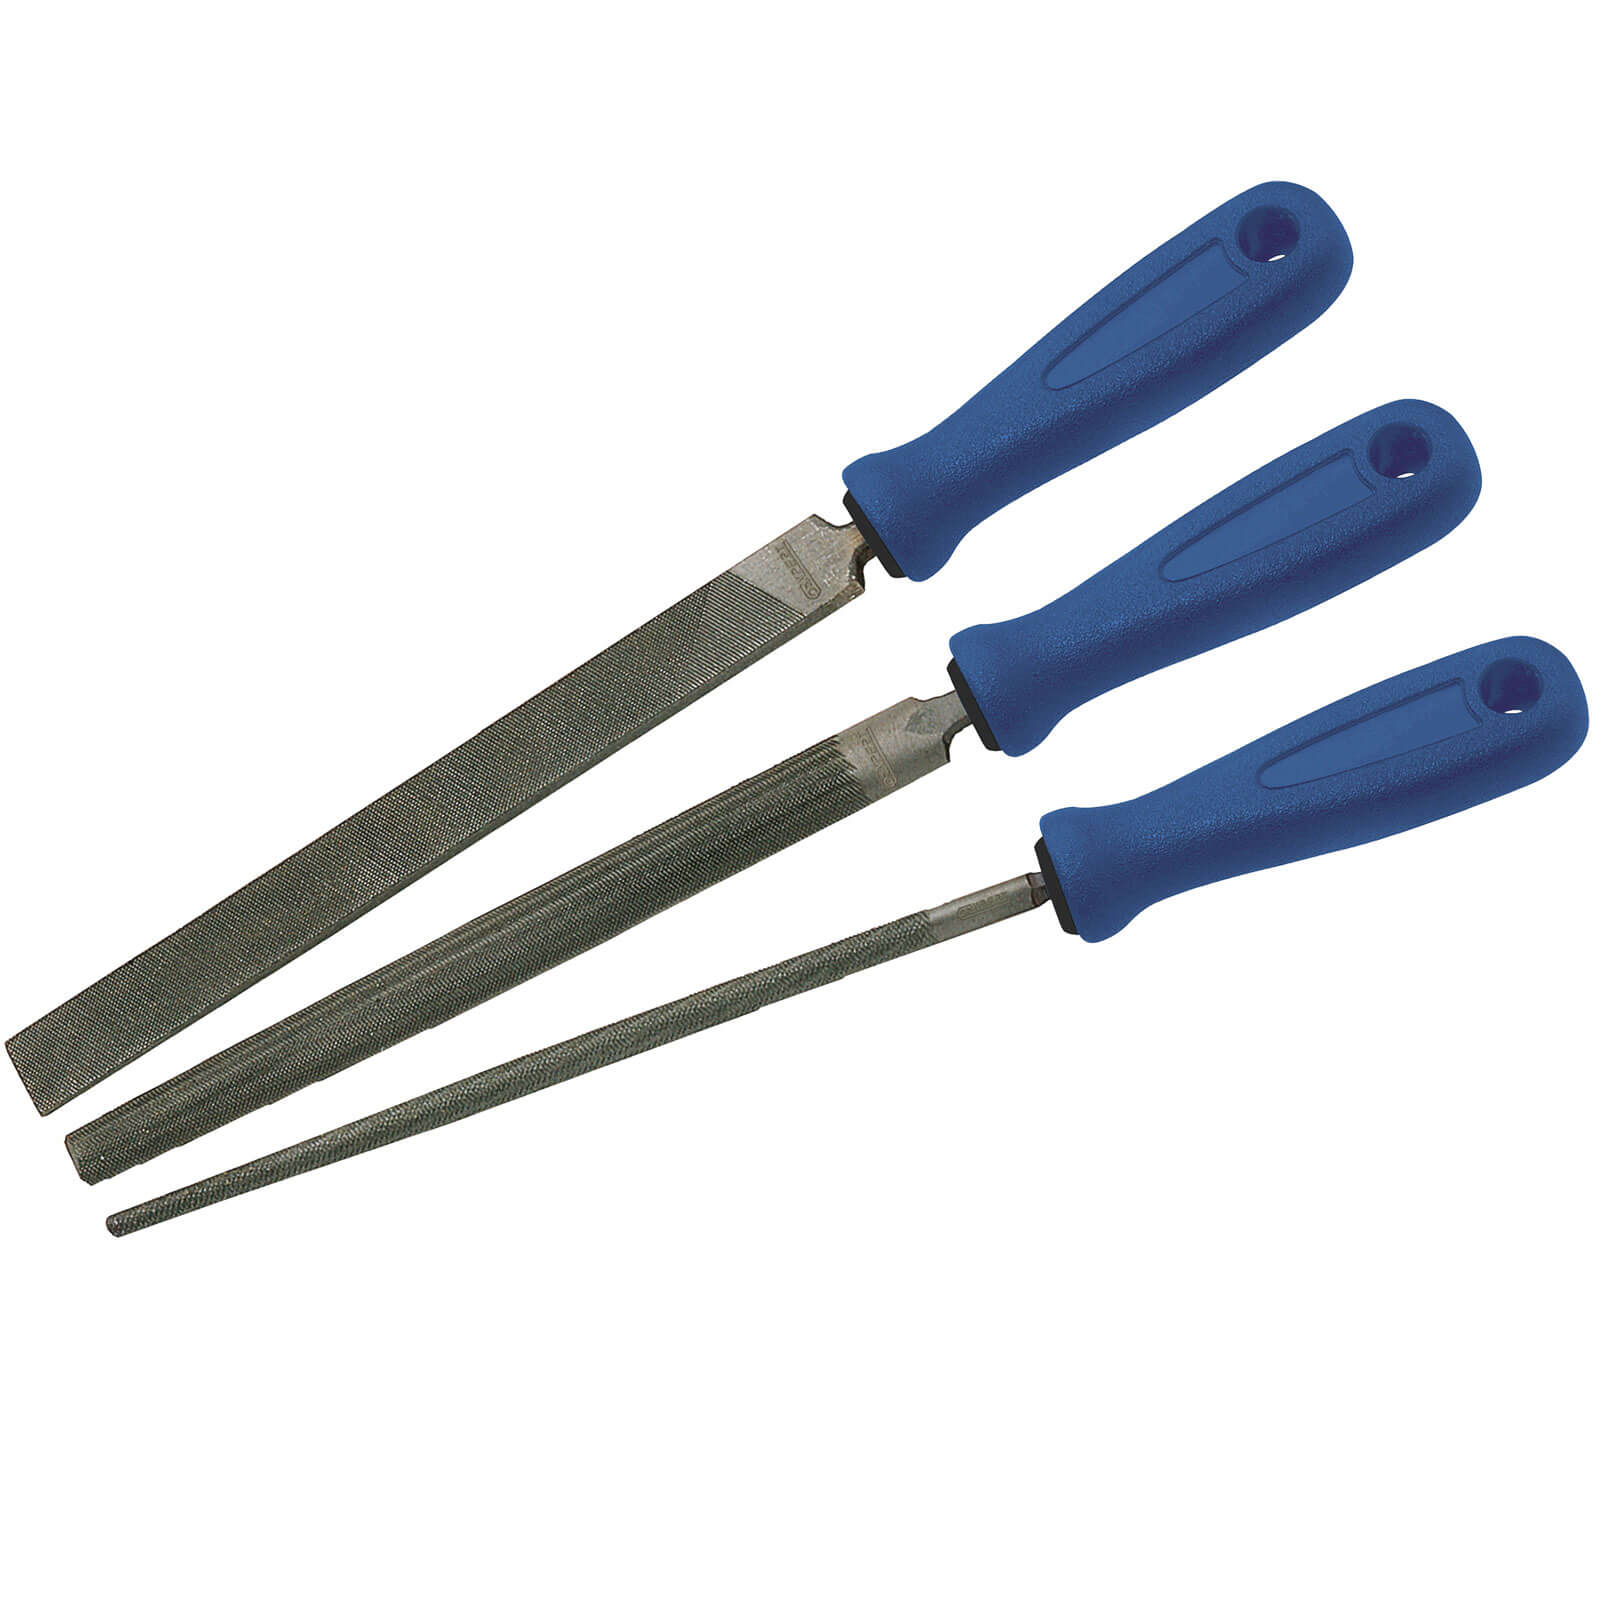 Expert by Facom 3 Piece Second Cut File Set